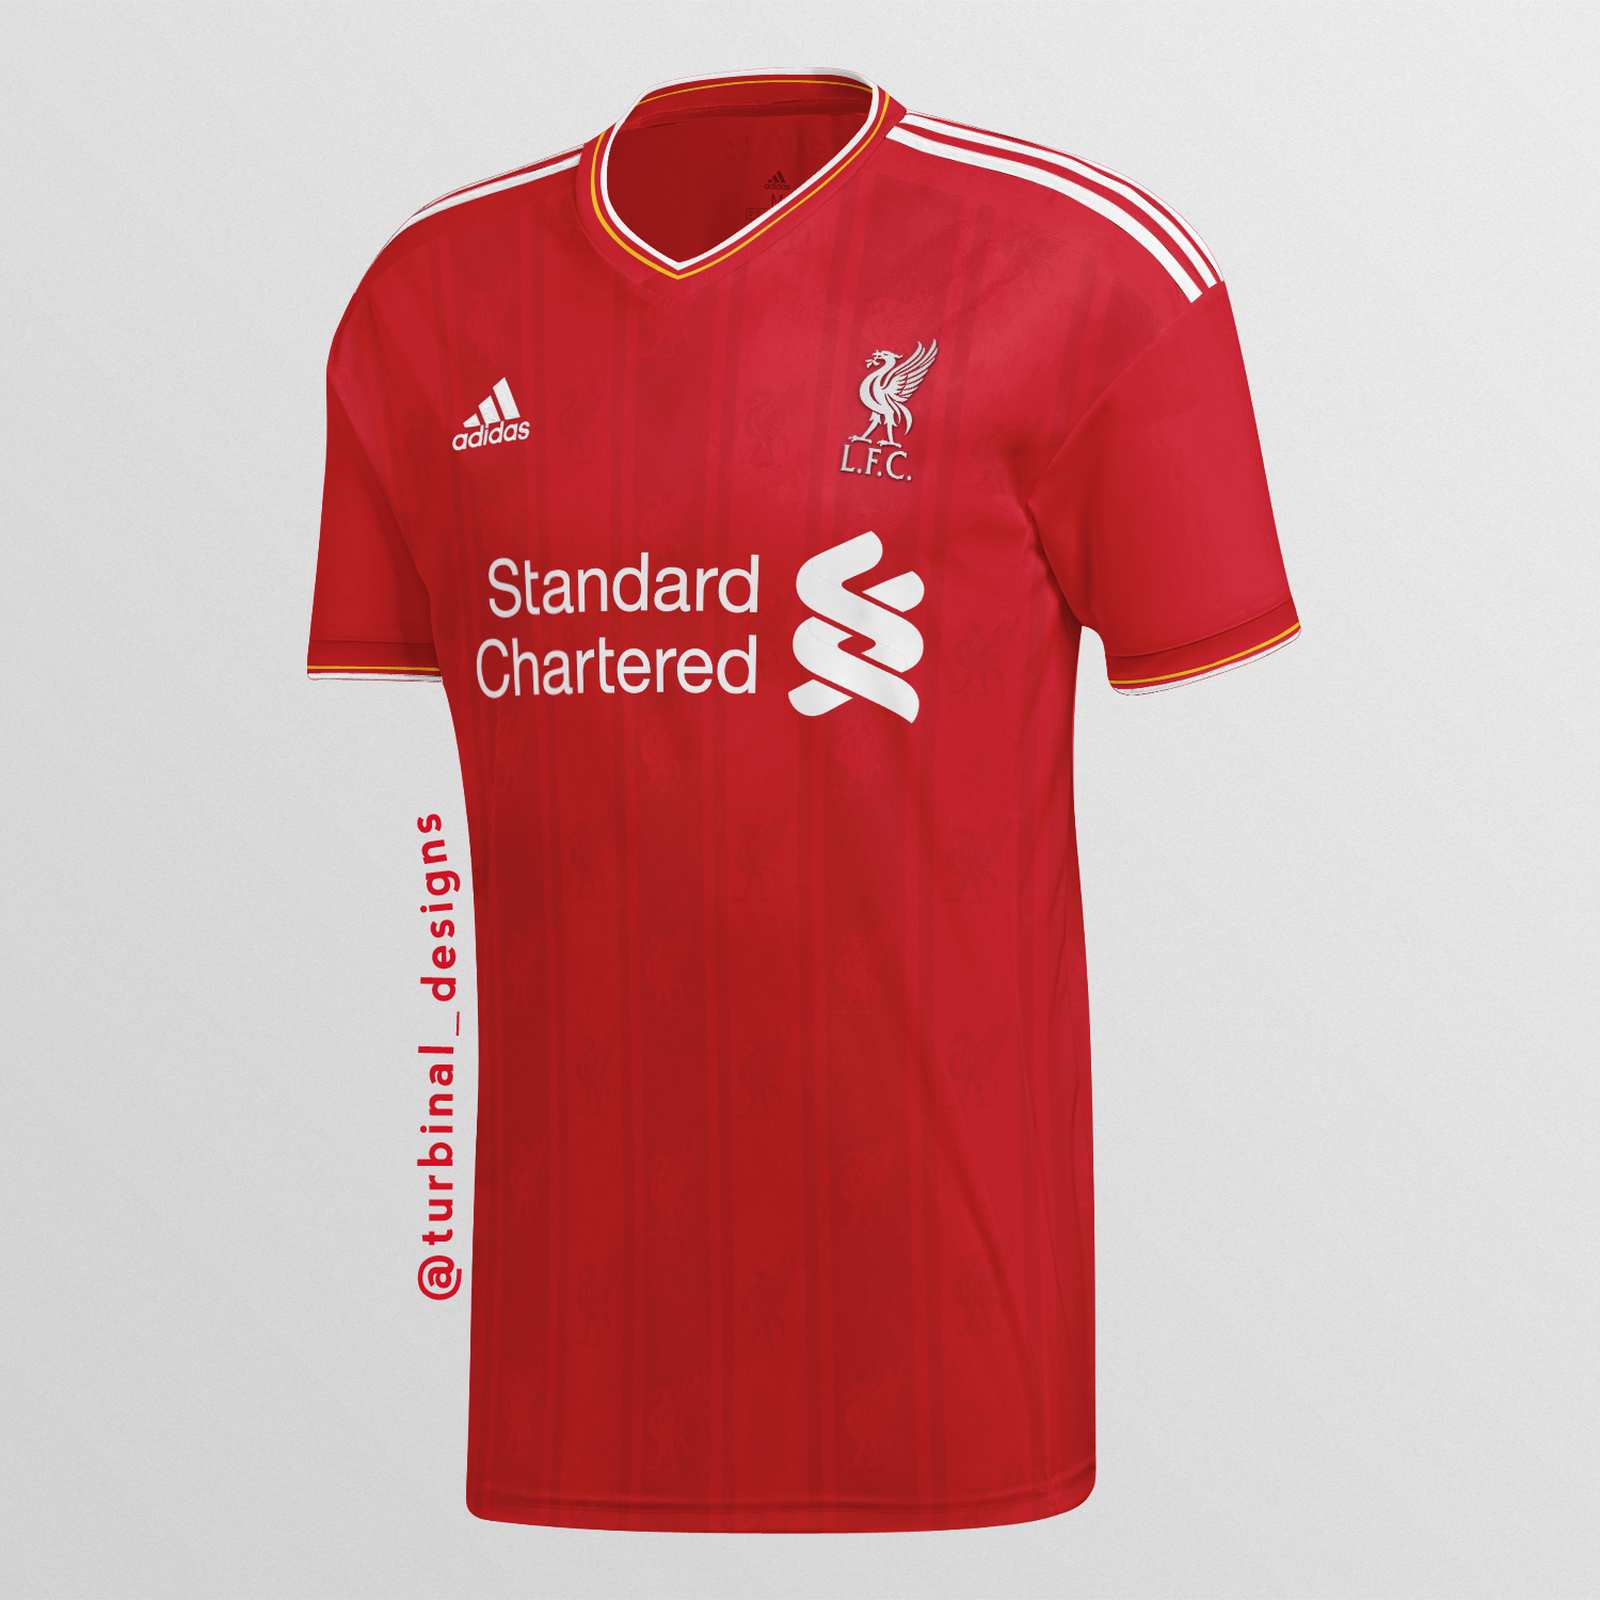 adidas liverpool t shirt Shop Clothing & Shoes Online